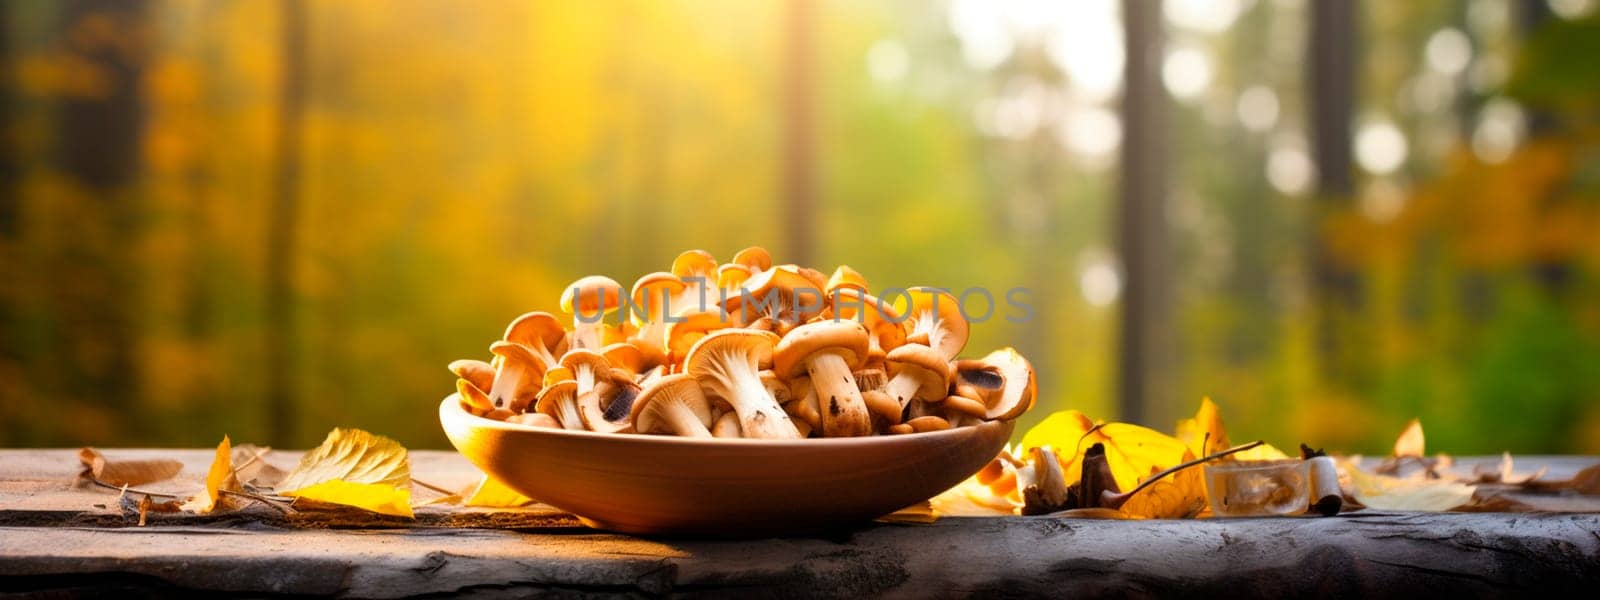 Edible mushrooms against a forest background. Selective focus. Food.